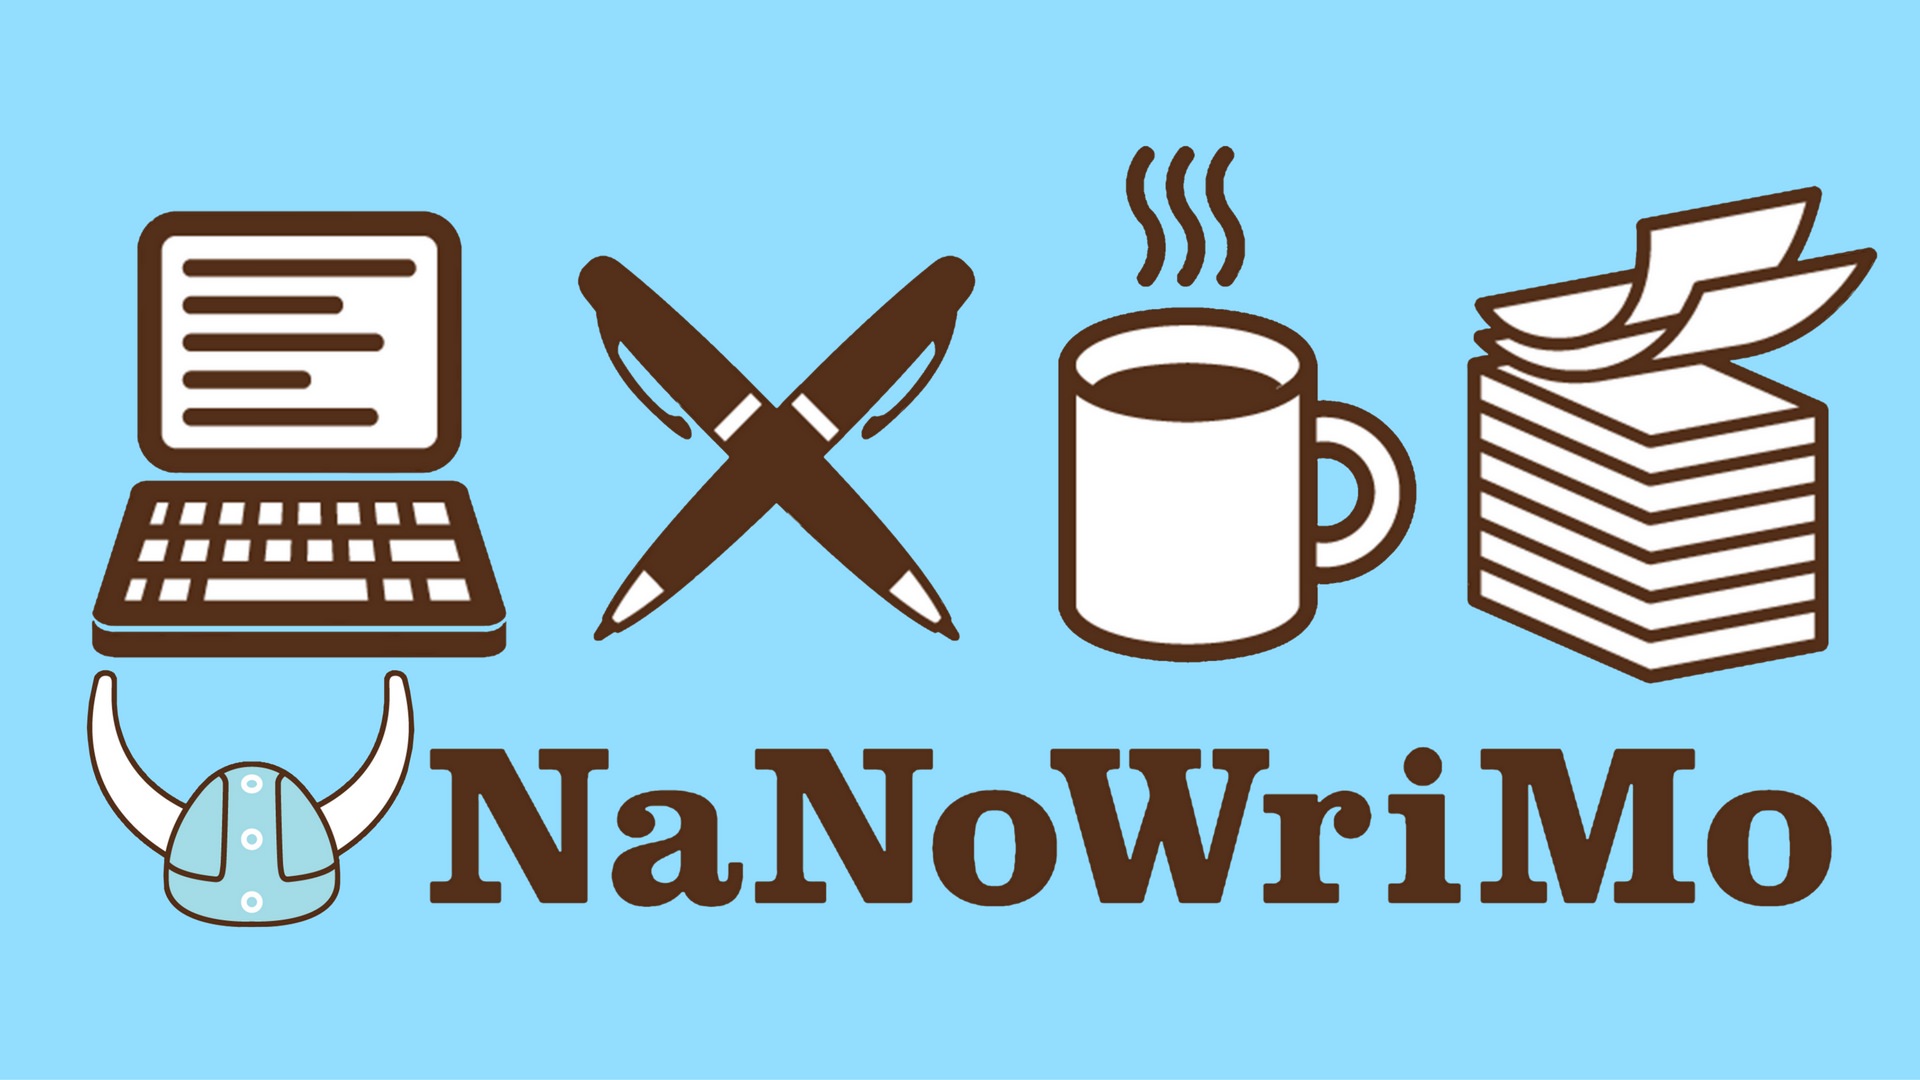 The NaNoWriMo official logo: a horned helmet, laptop, coffee cup, stack of papers, and pen.